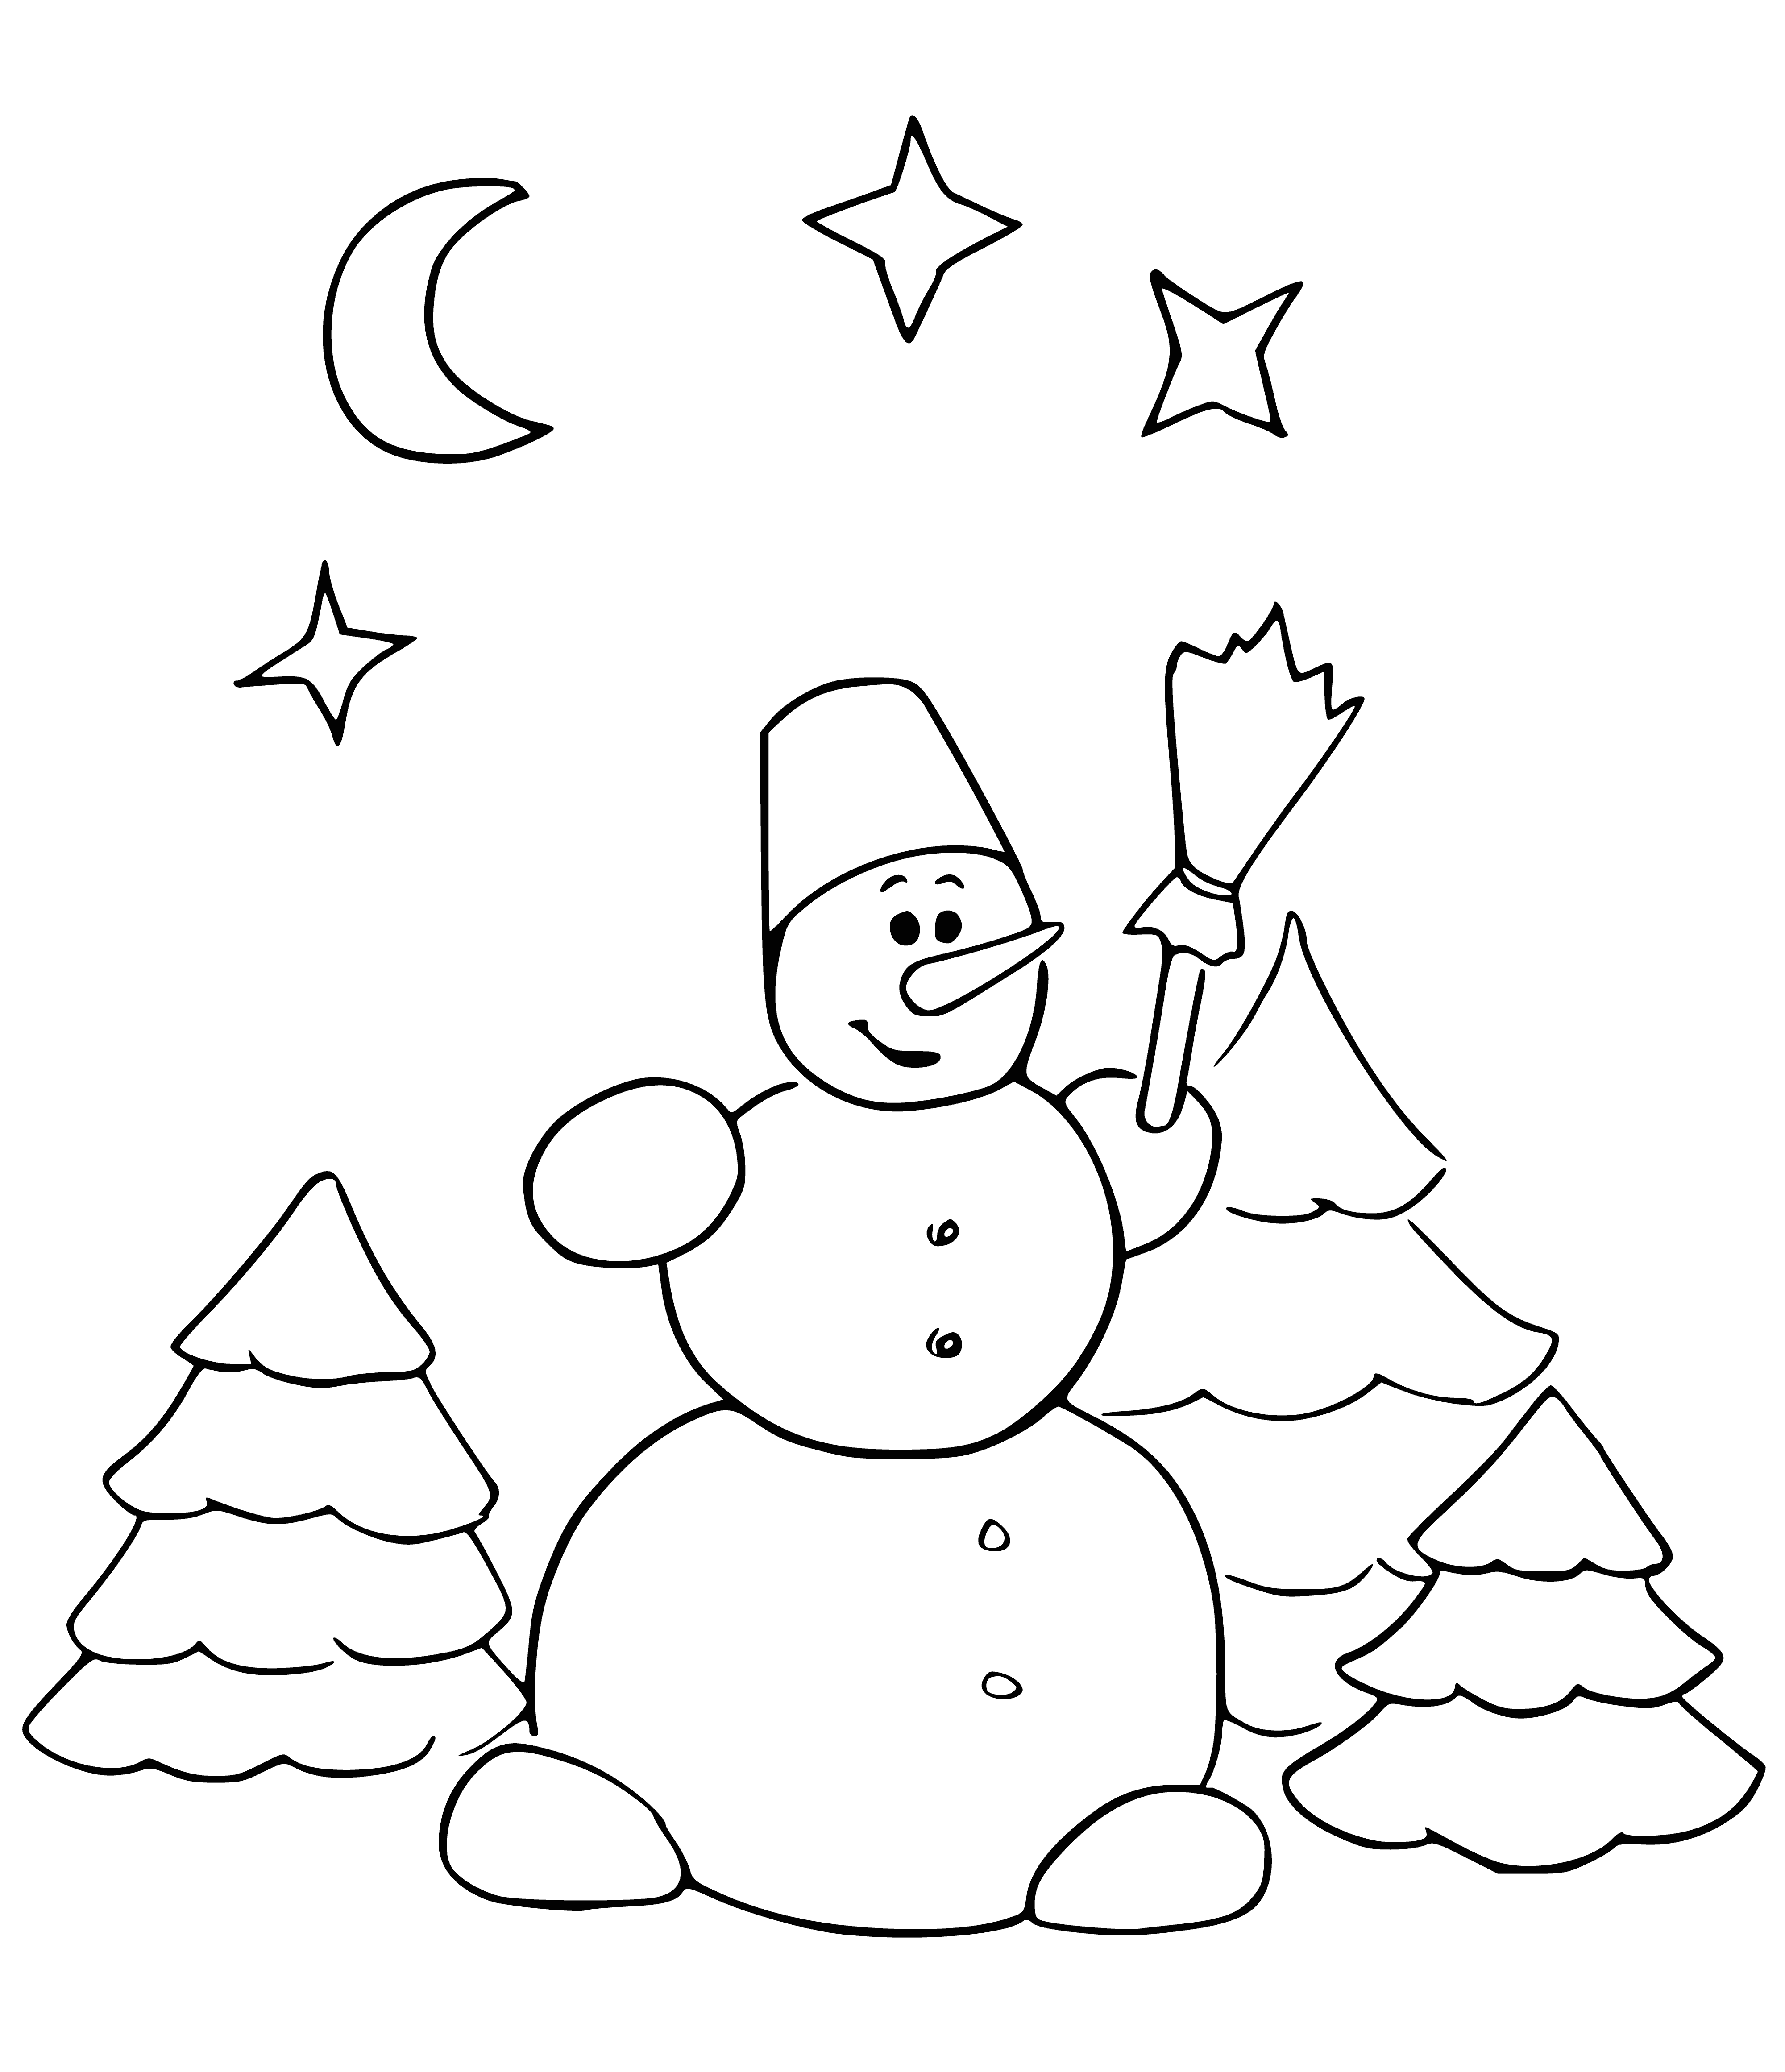 Snowman in a snowy forest wears a red scarf & has a carrot nose. Trees around it also have snow on them & ground is cold & white.